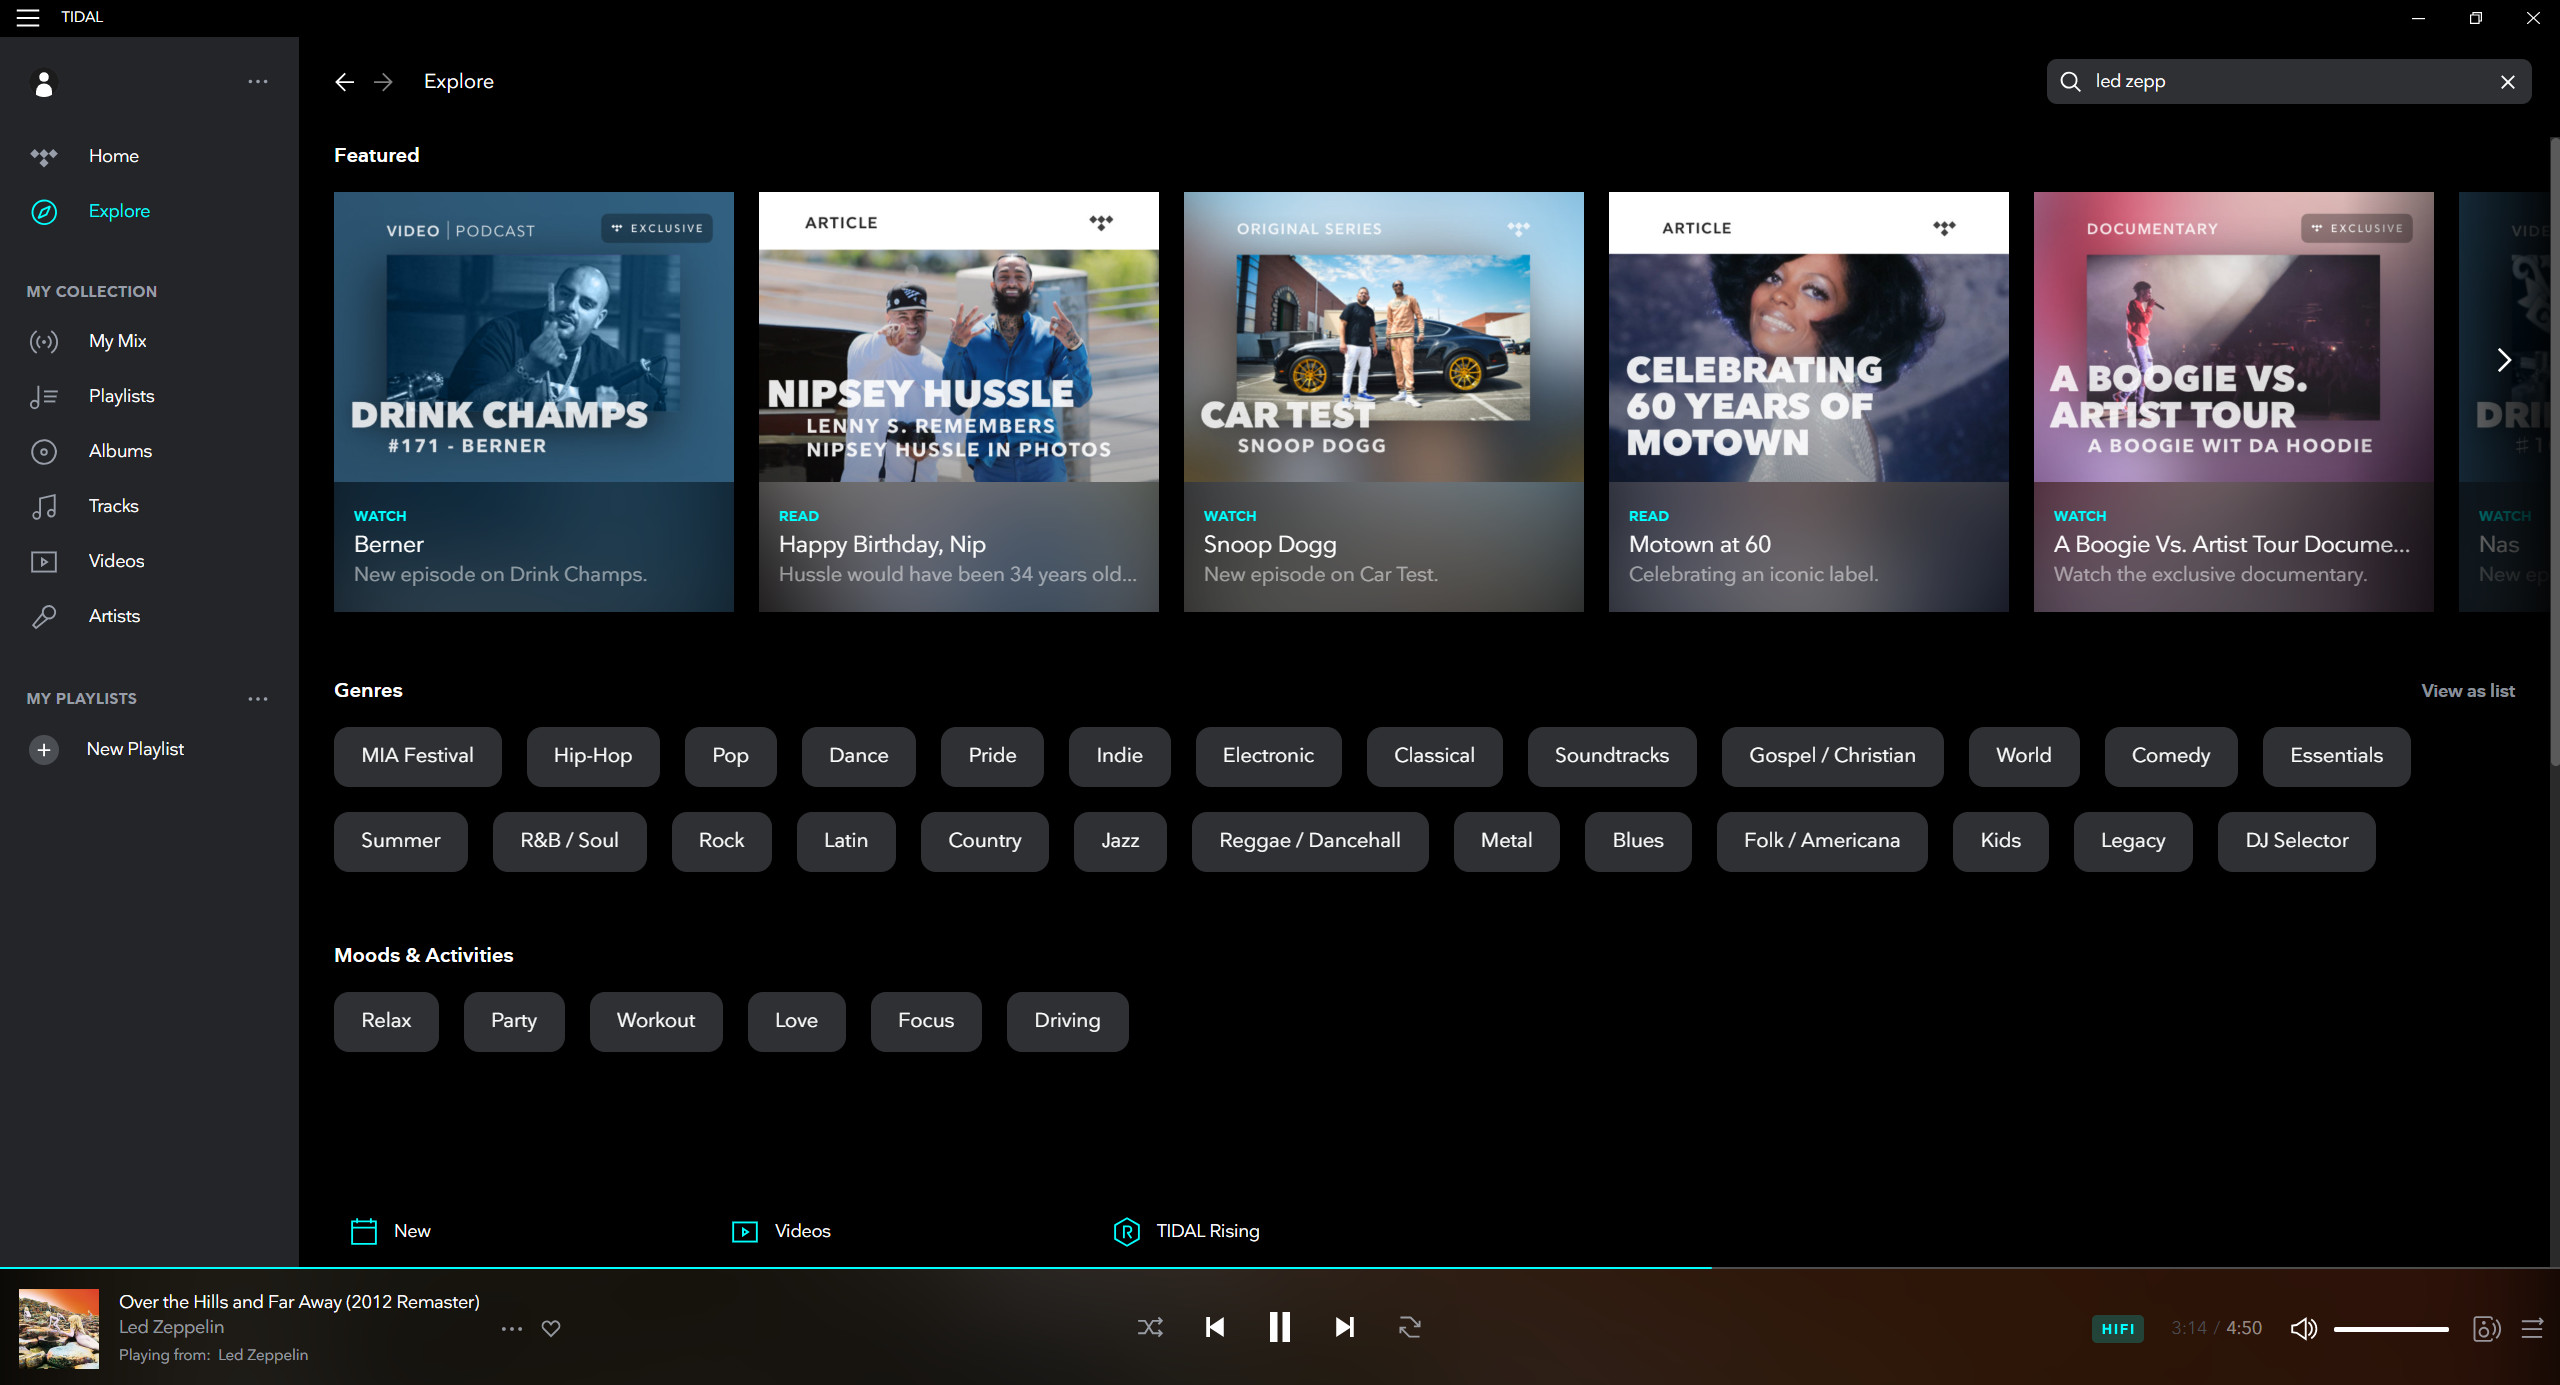 A screenshot of the Tidal HiFi desktop application with the featured playlists and genres page pulled up.